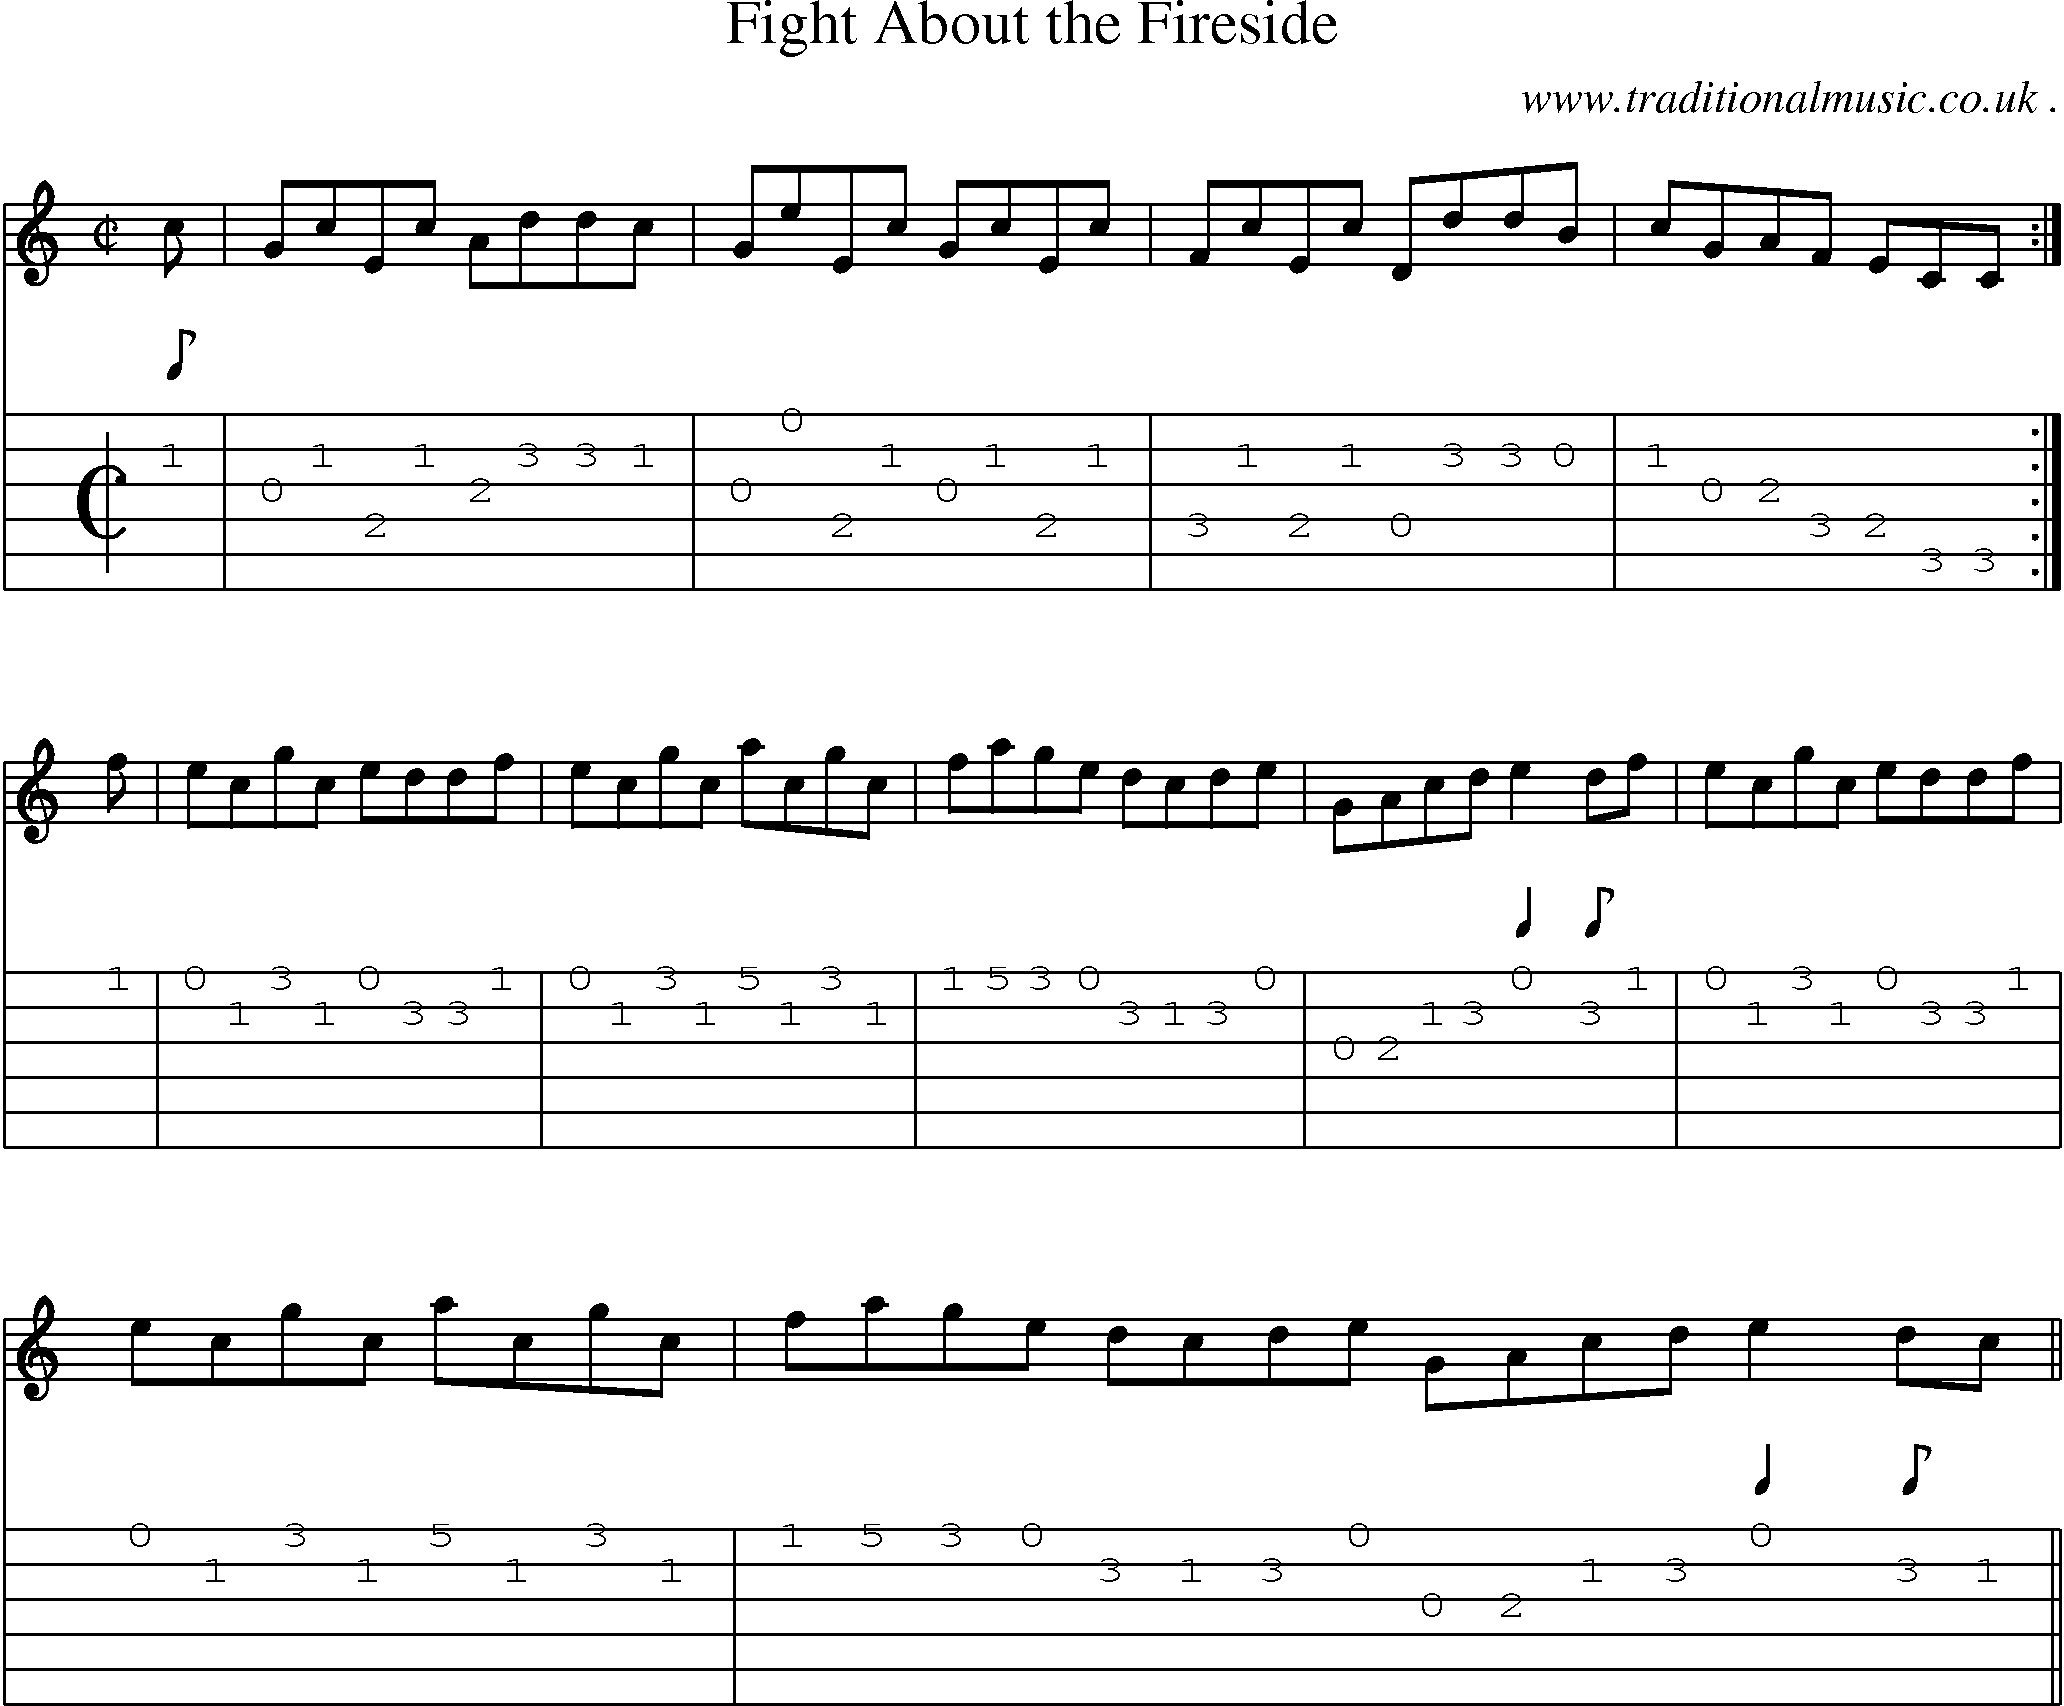 Sheet-music  score, Chords and Guitar Tabs for Fight About The Fireside